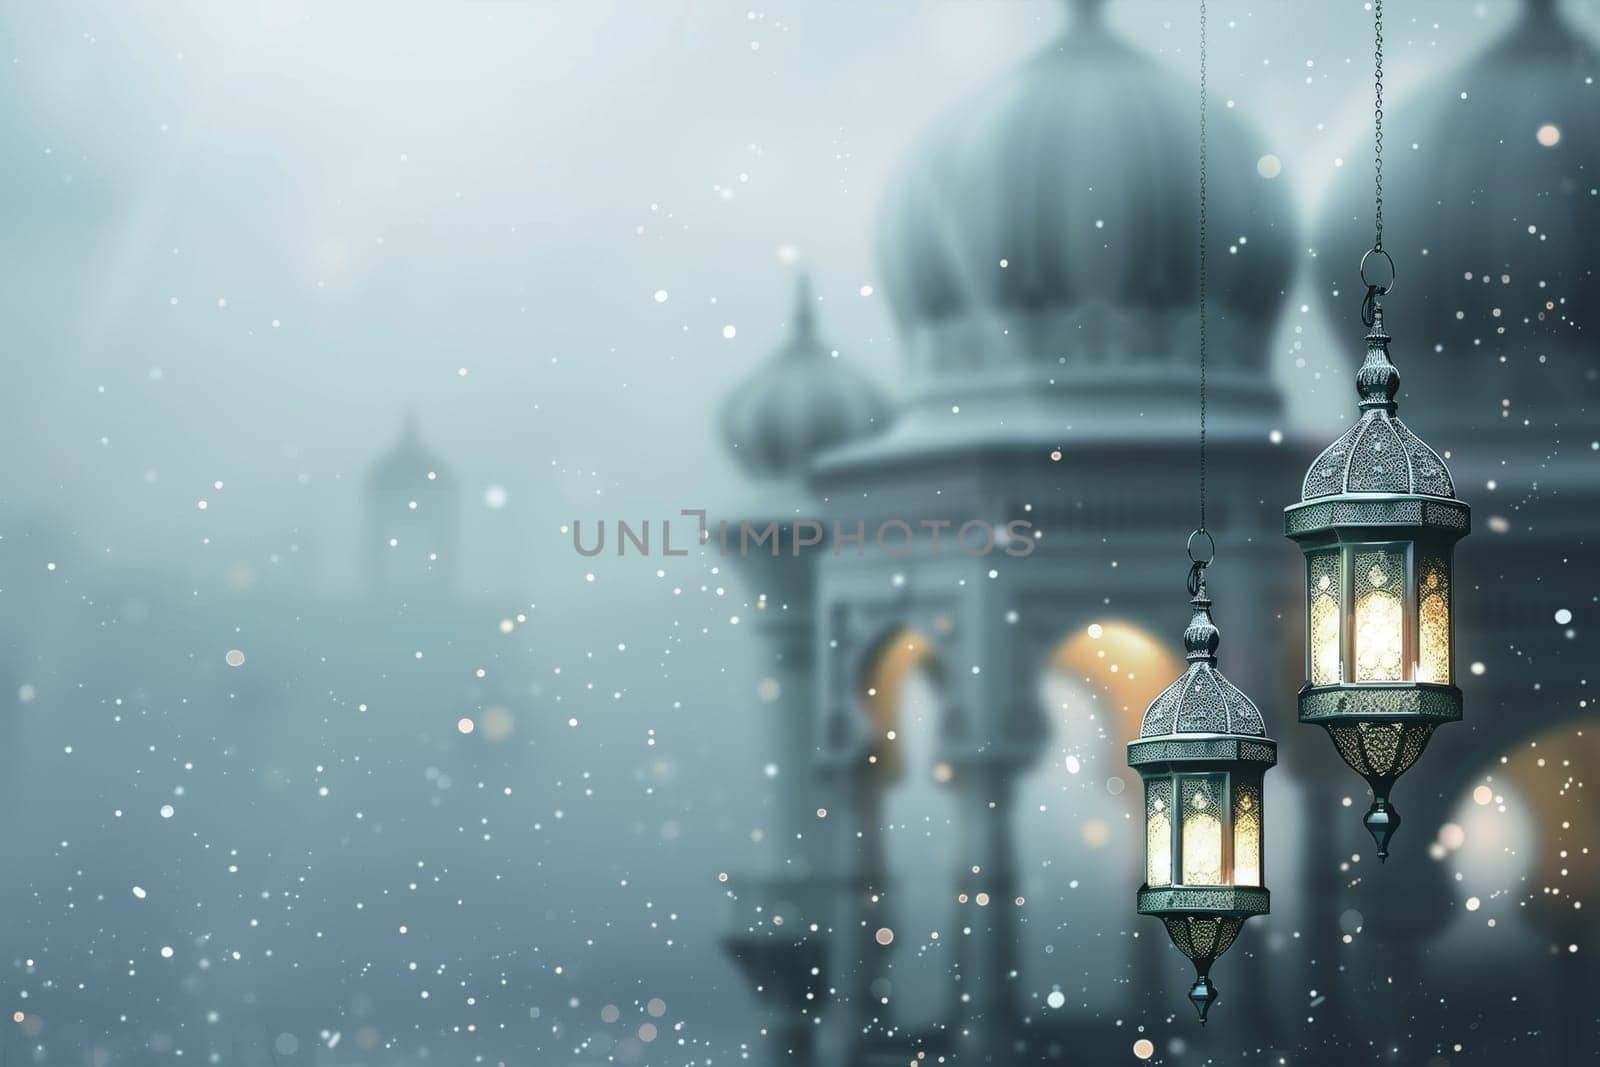 Illuminated lanterns hang outside a mosque, their warm light contrasting with the gentle snowfall of a tranquil evening.